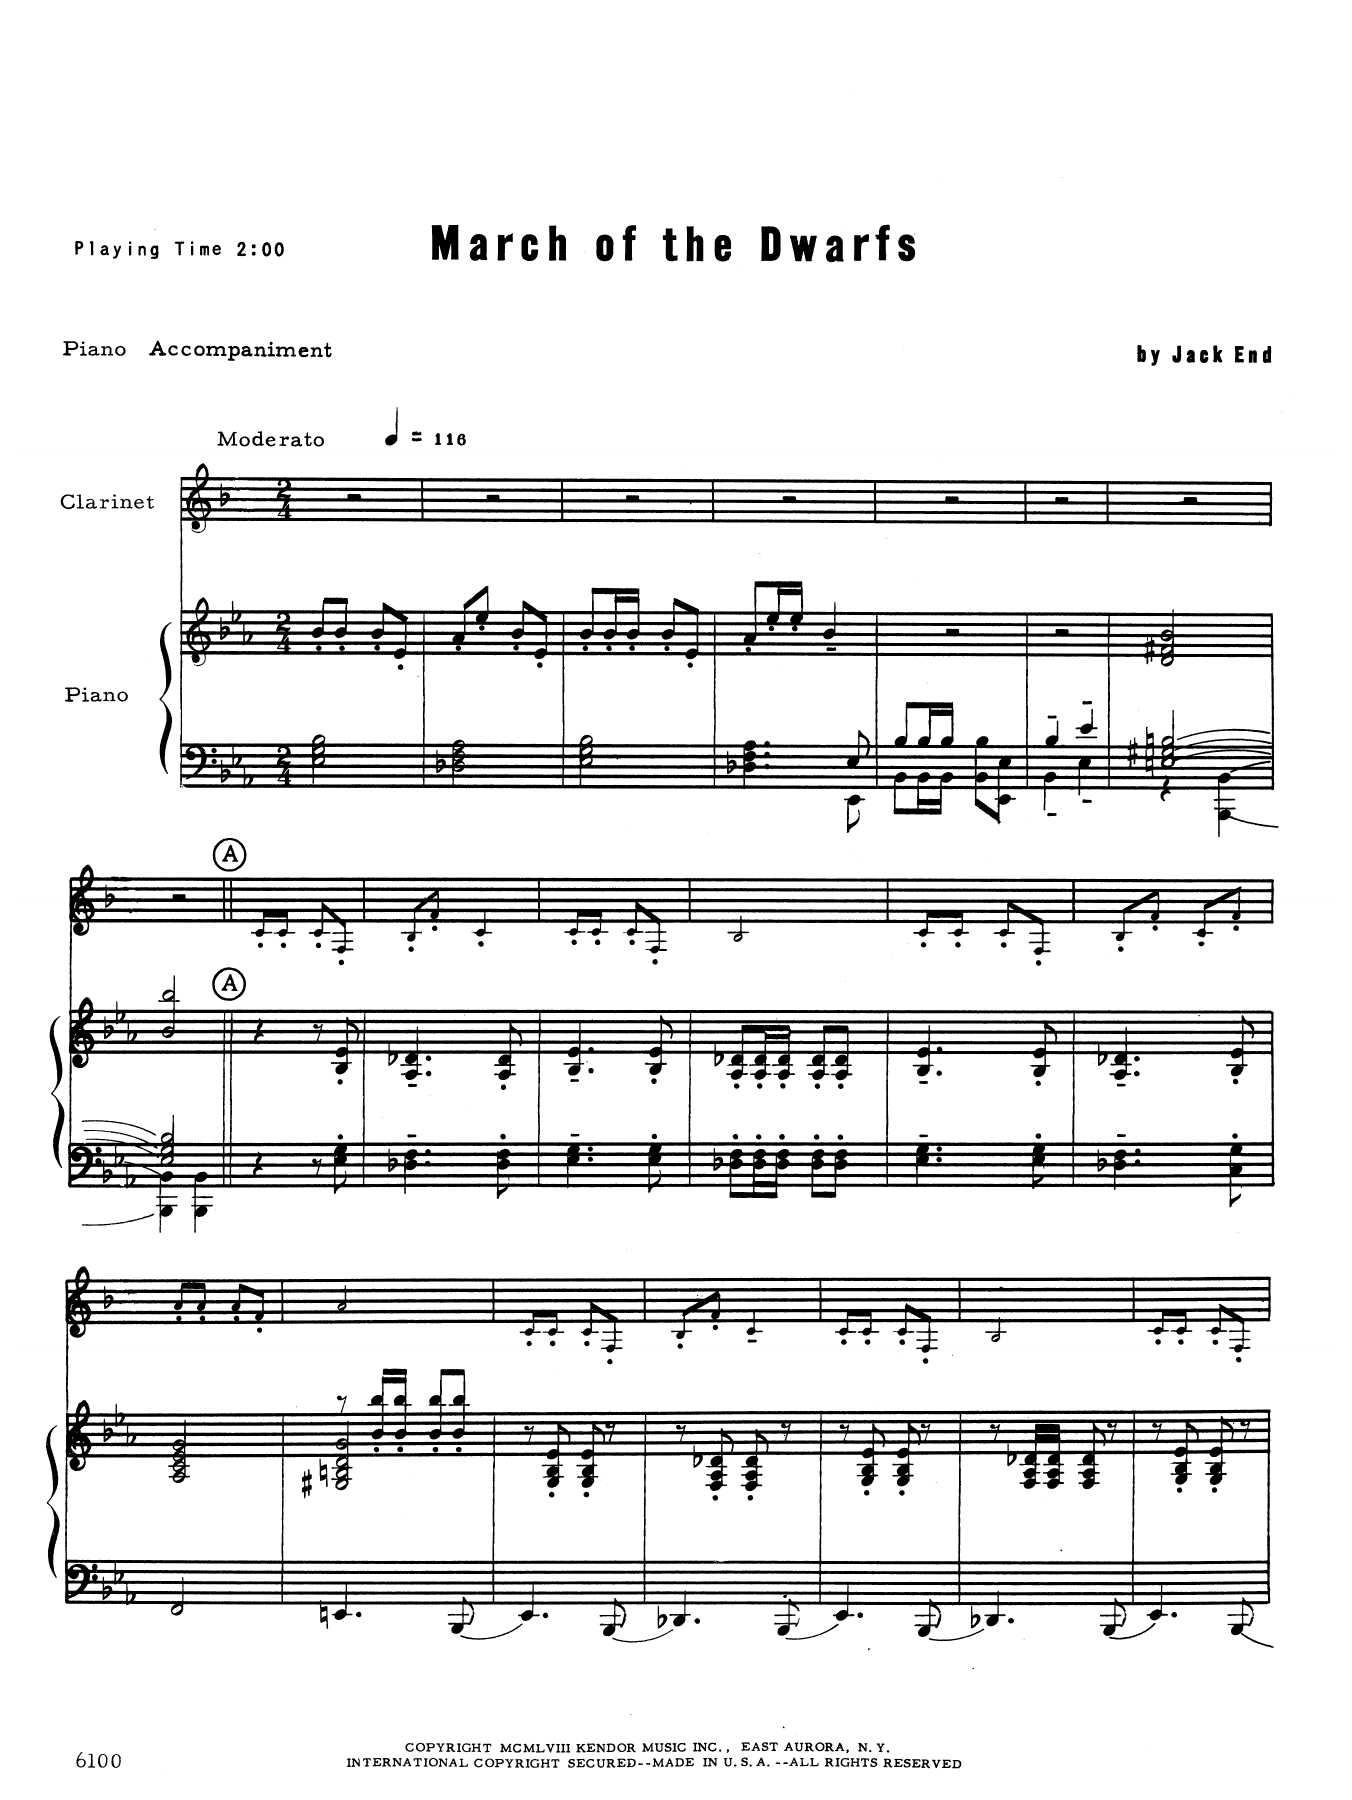 Download Jack End March of the Dwarfs - Piano (optional) Sheet Music